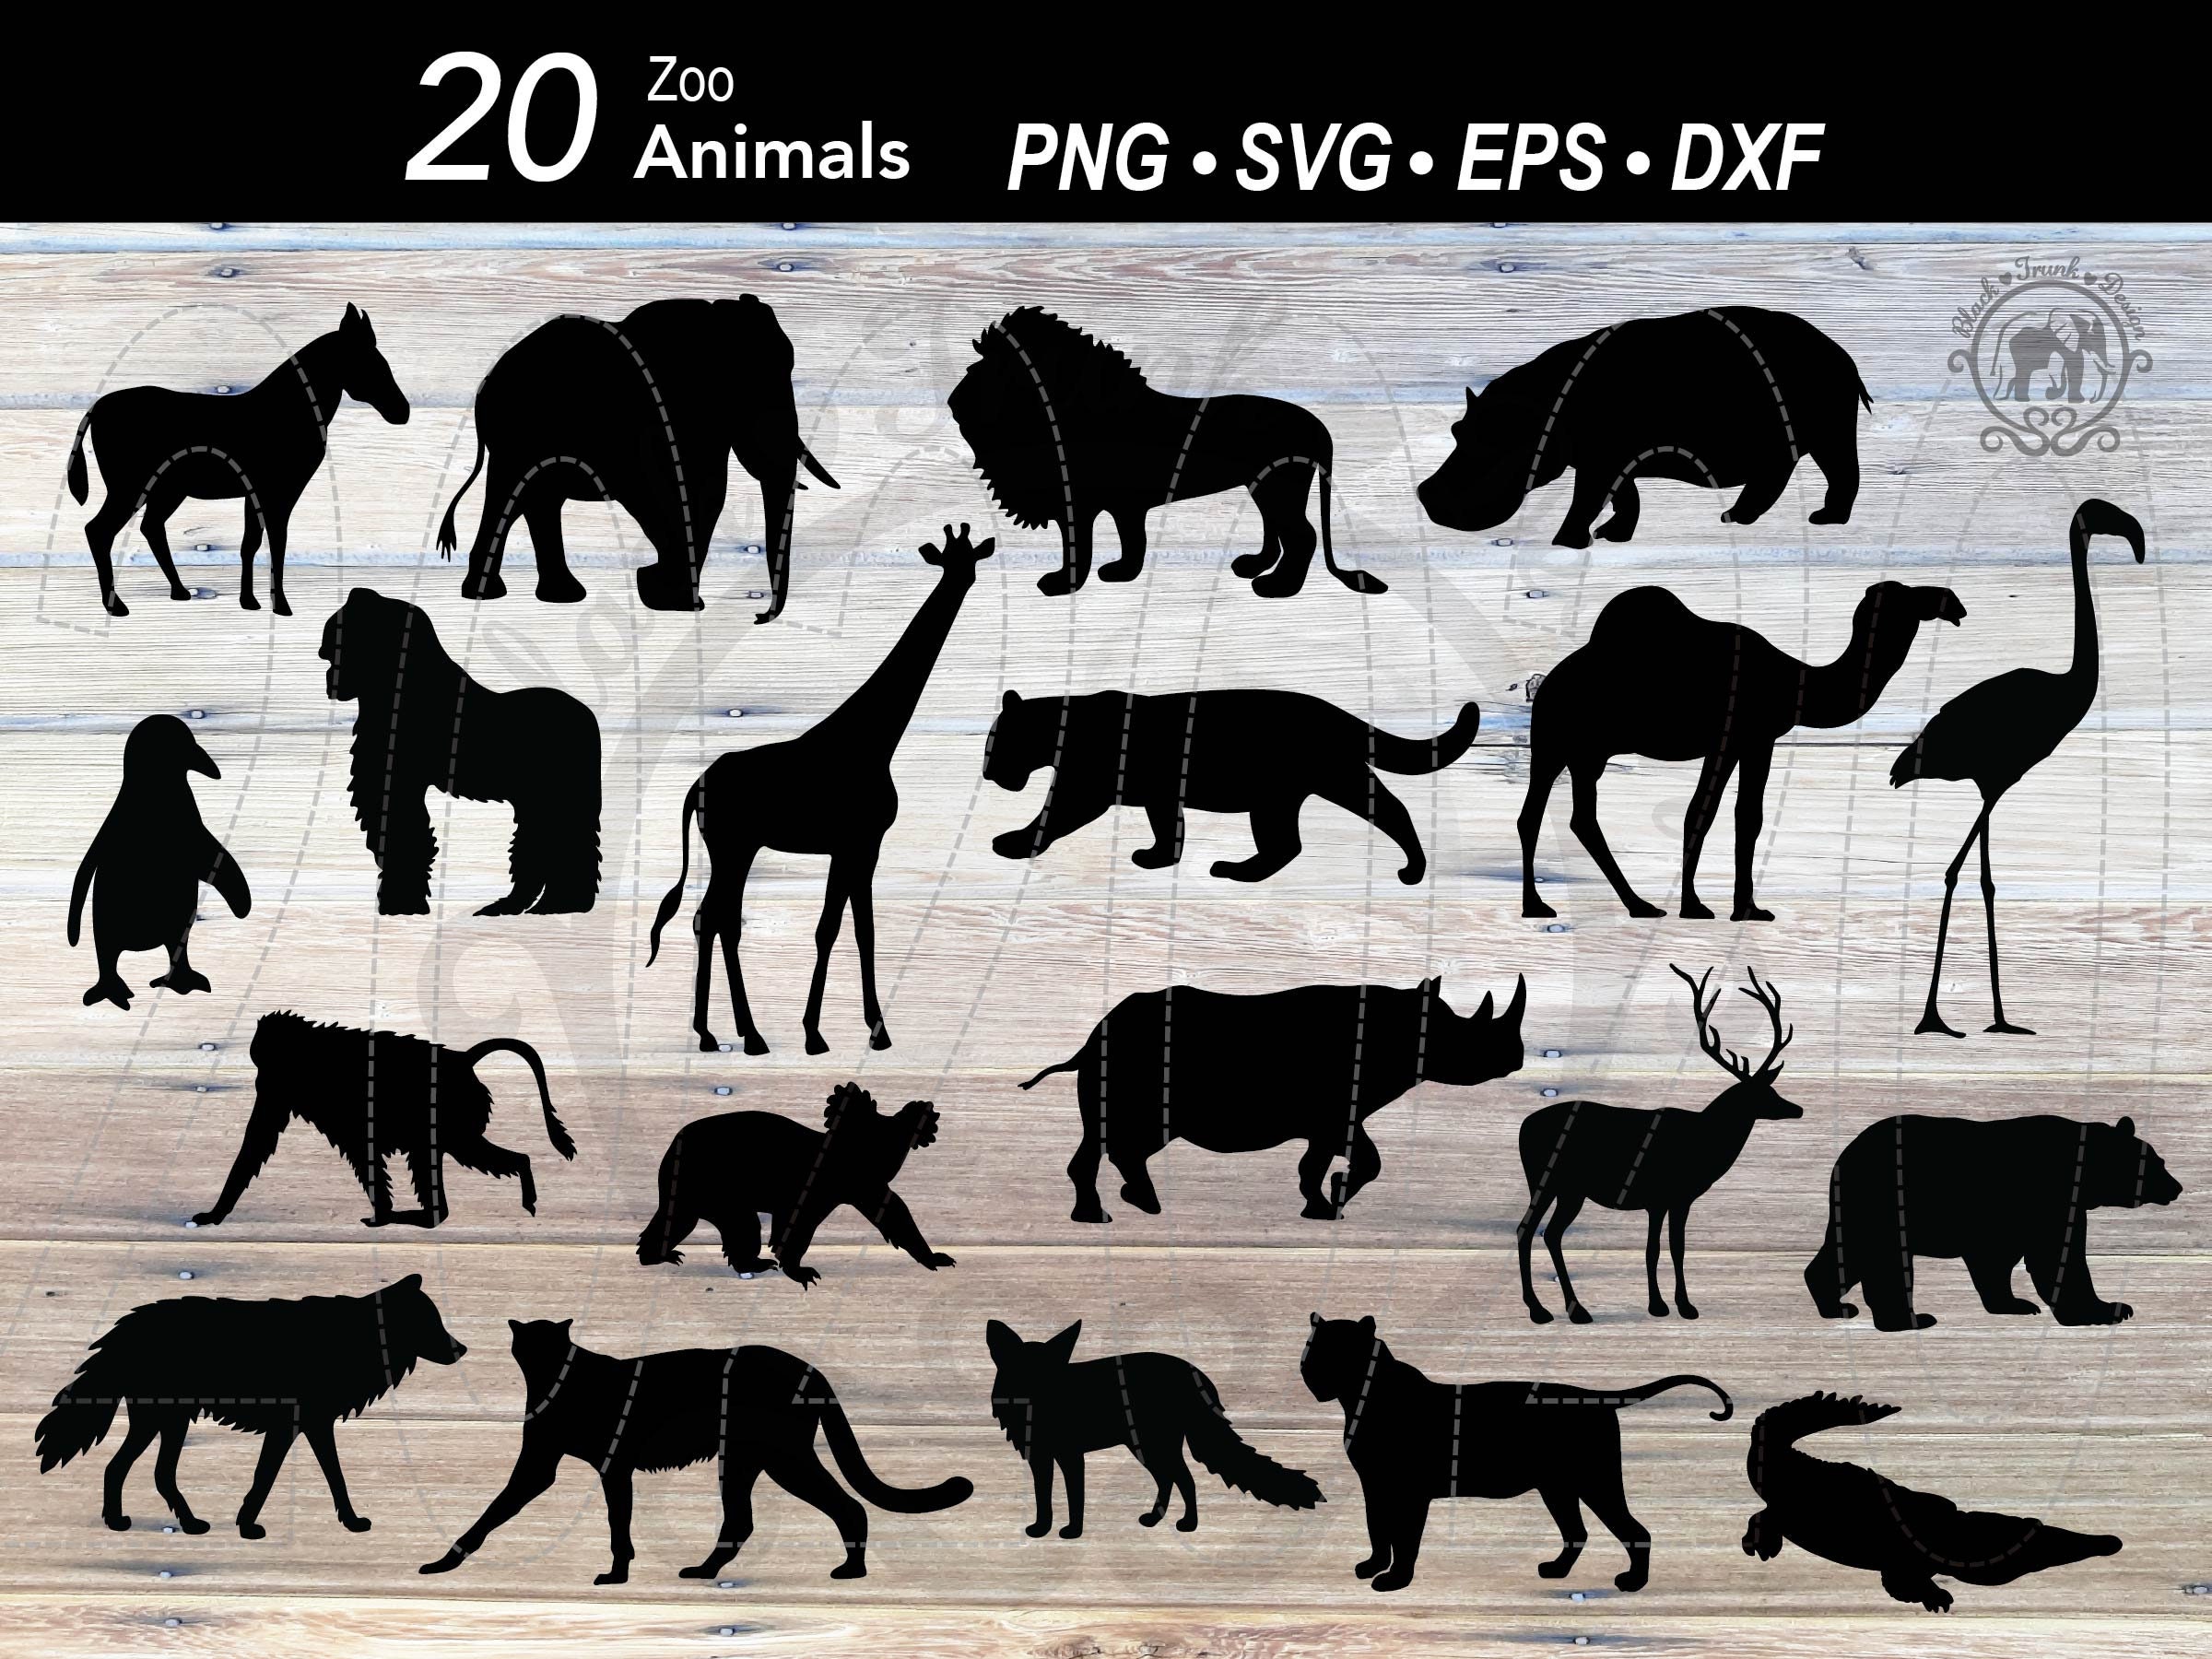 9 Pieces Animal Stencil Templates Reusable Animal Painting Stencil Bear  Tiger Elephant Horse Lion Giraffe Zebra Rhino Deer Craft Drawing Template  for